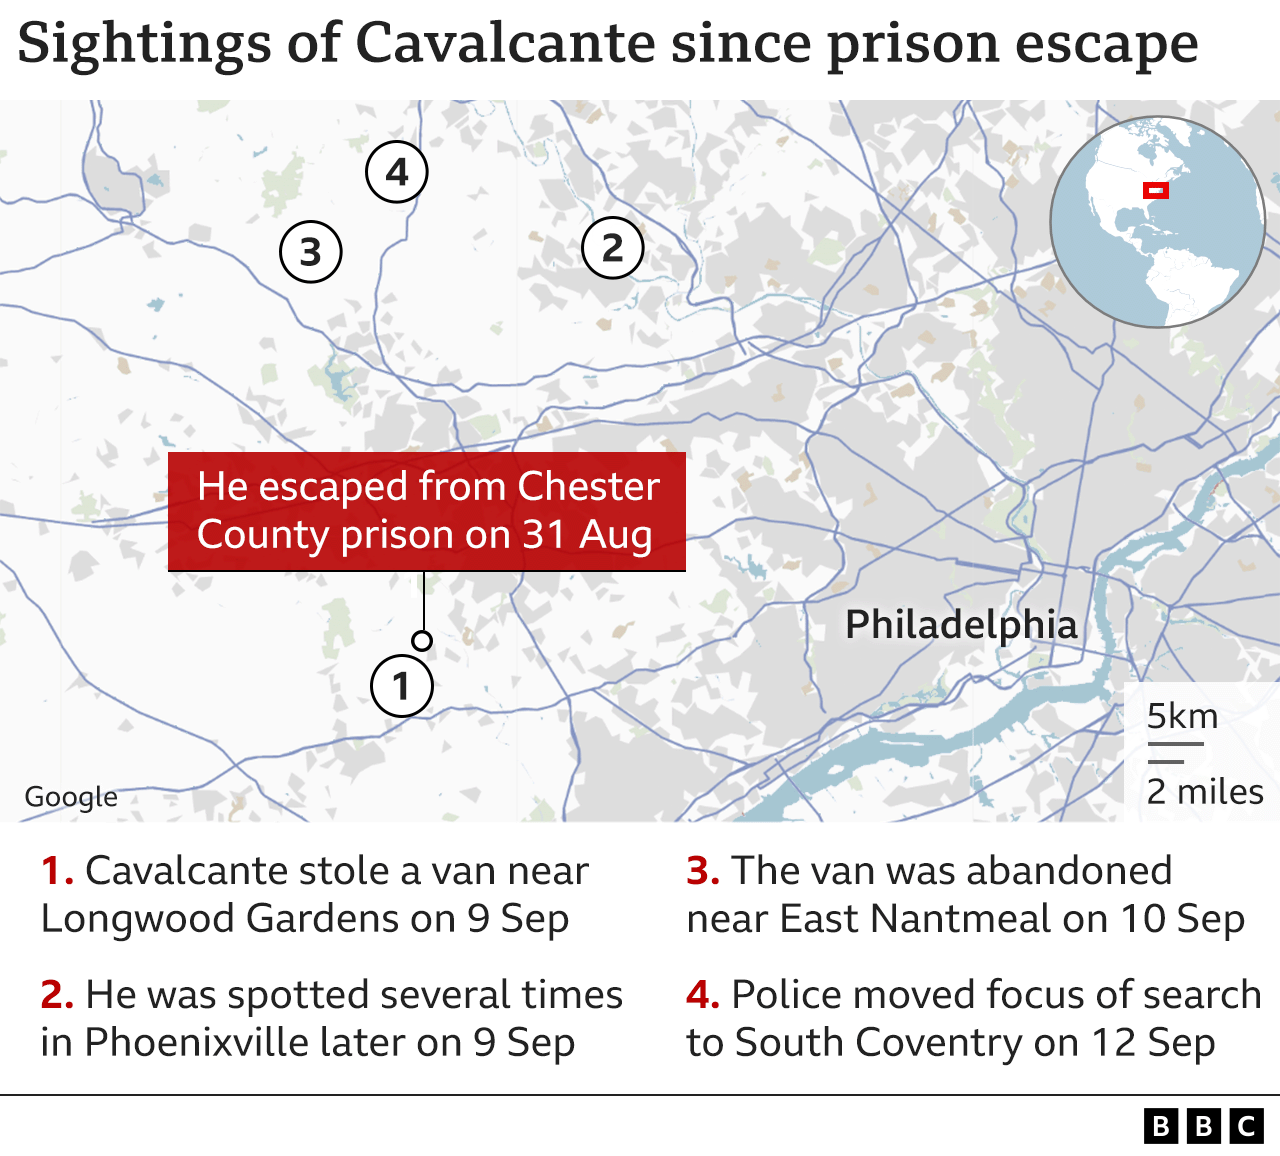 Map showing sightings of Cavalcante